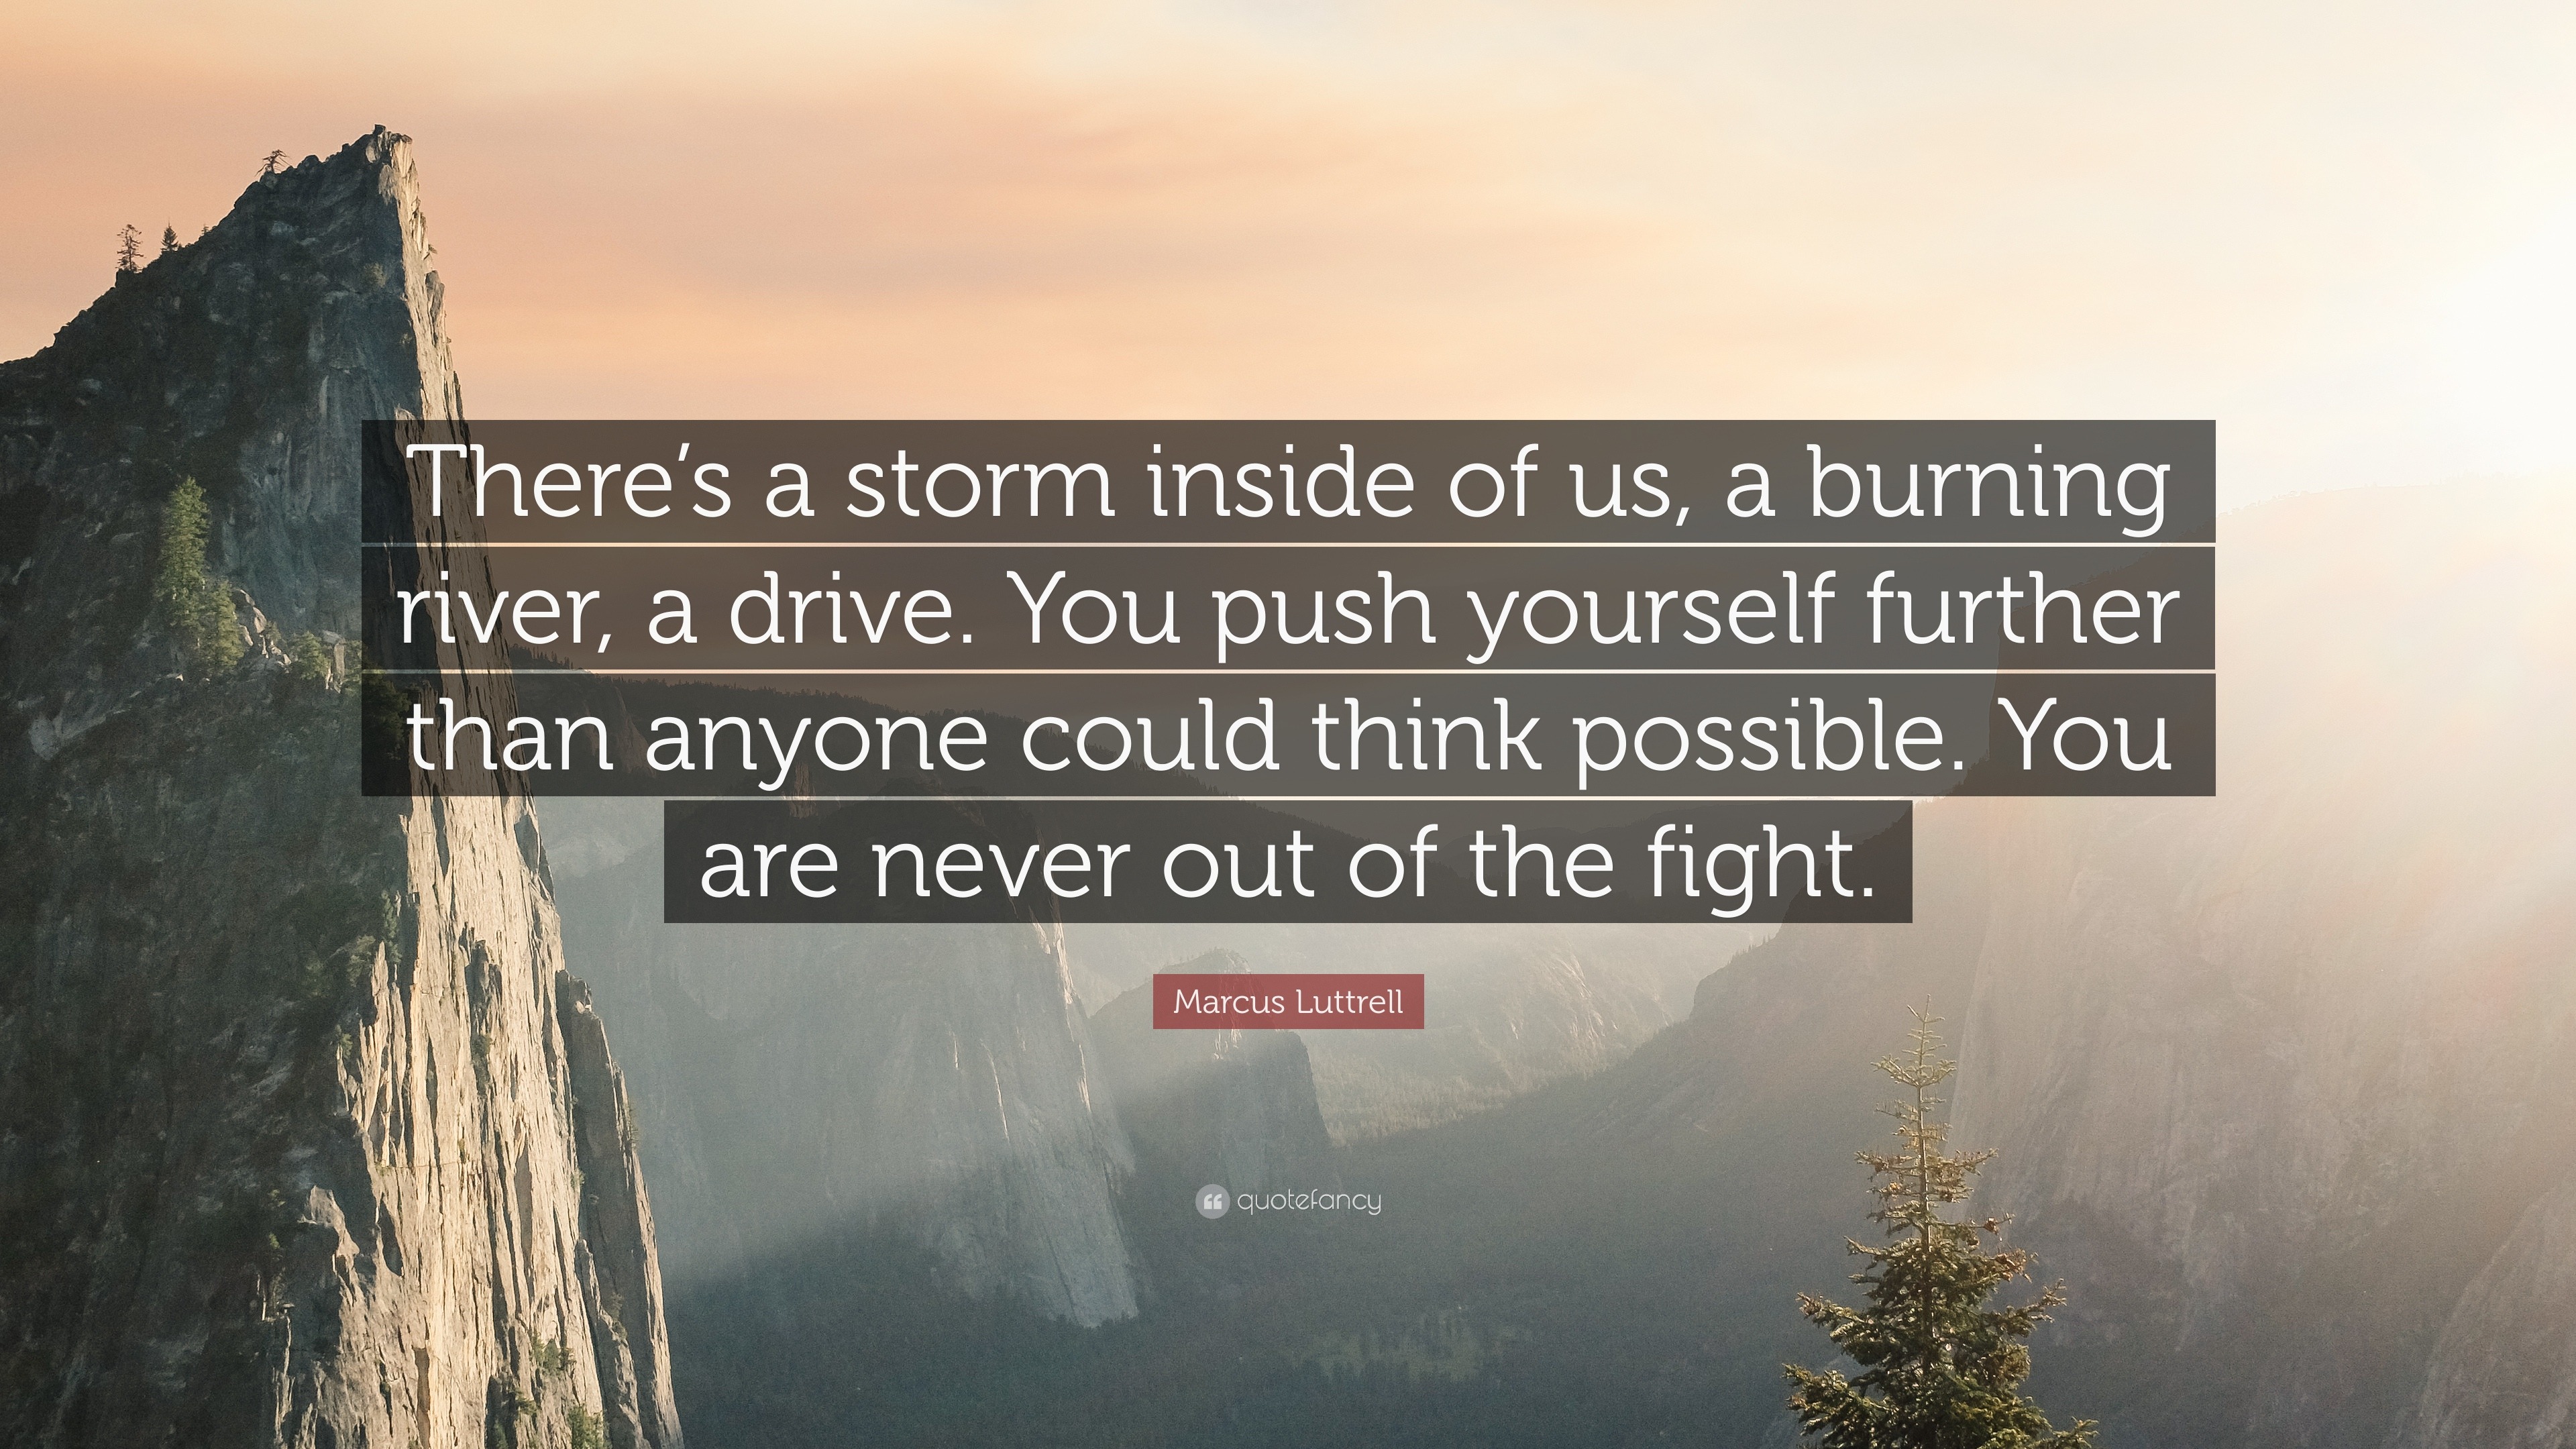 you are never out of the fight